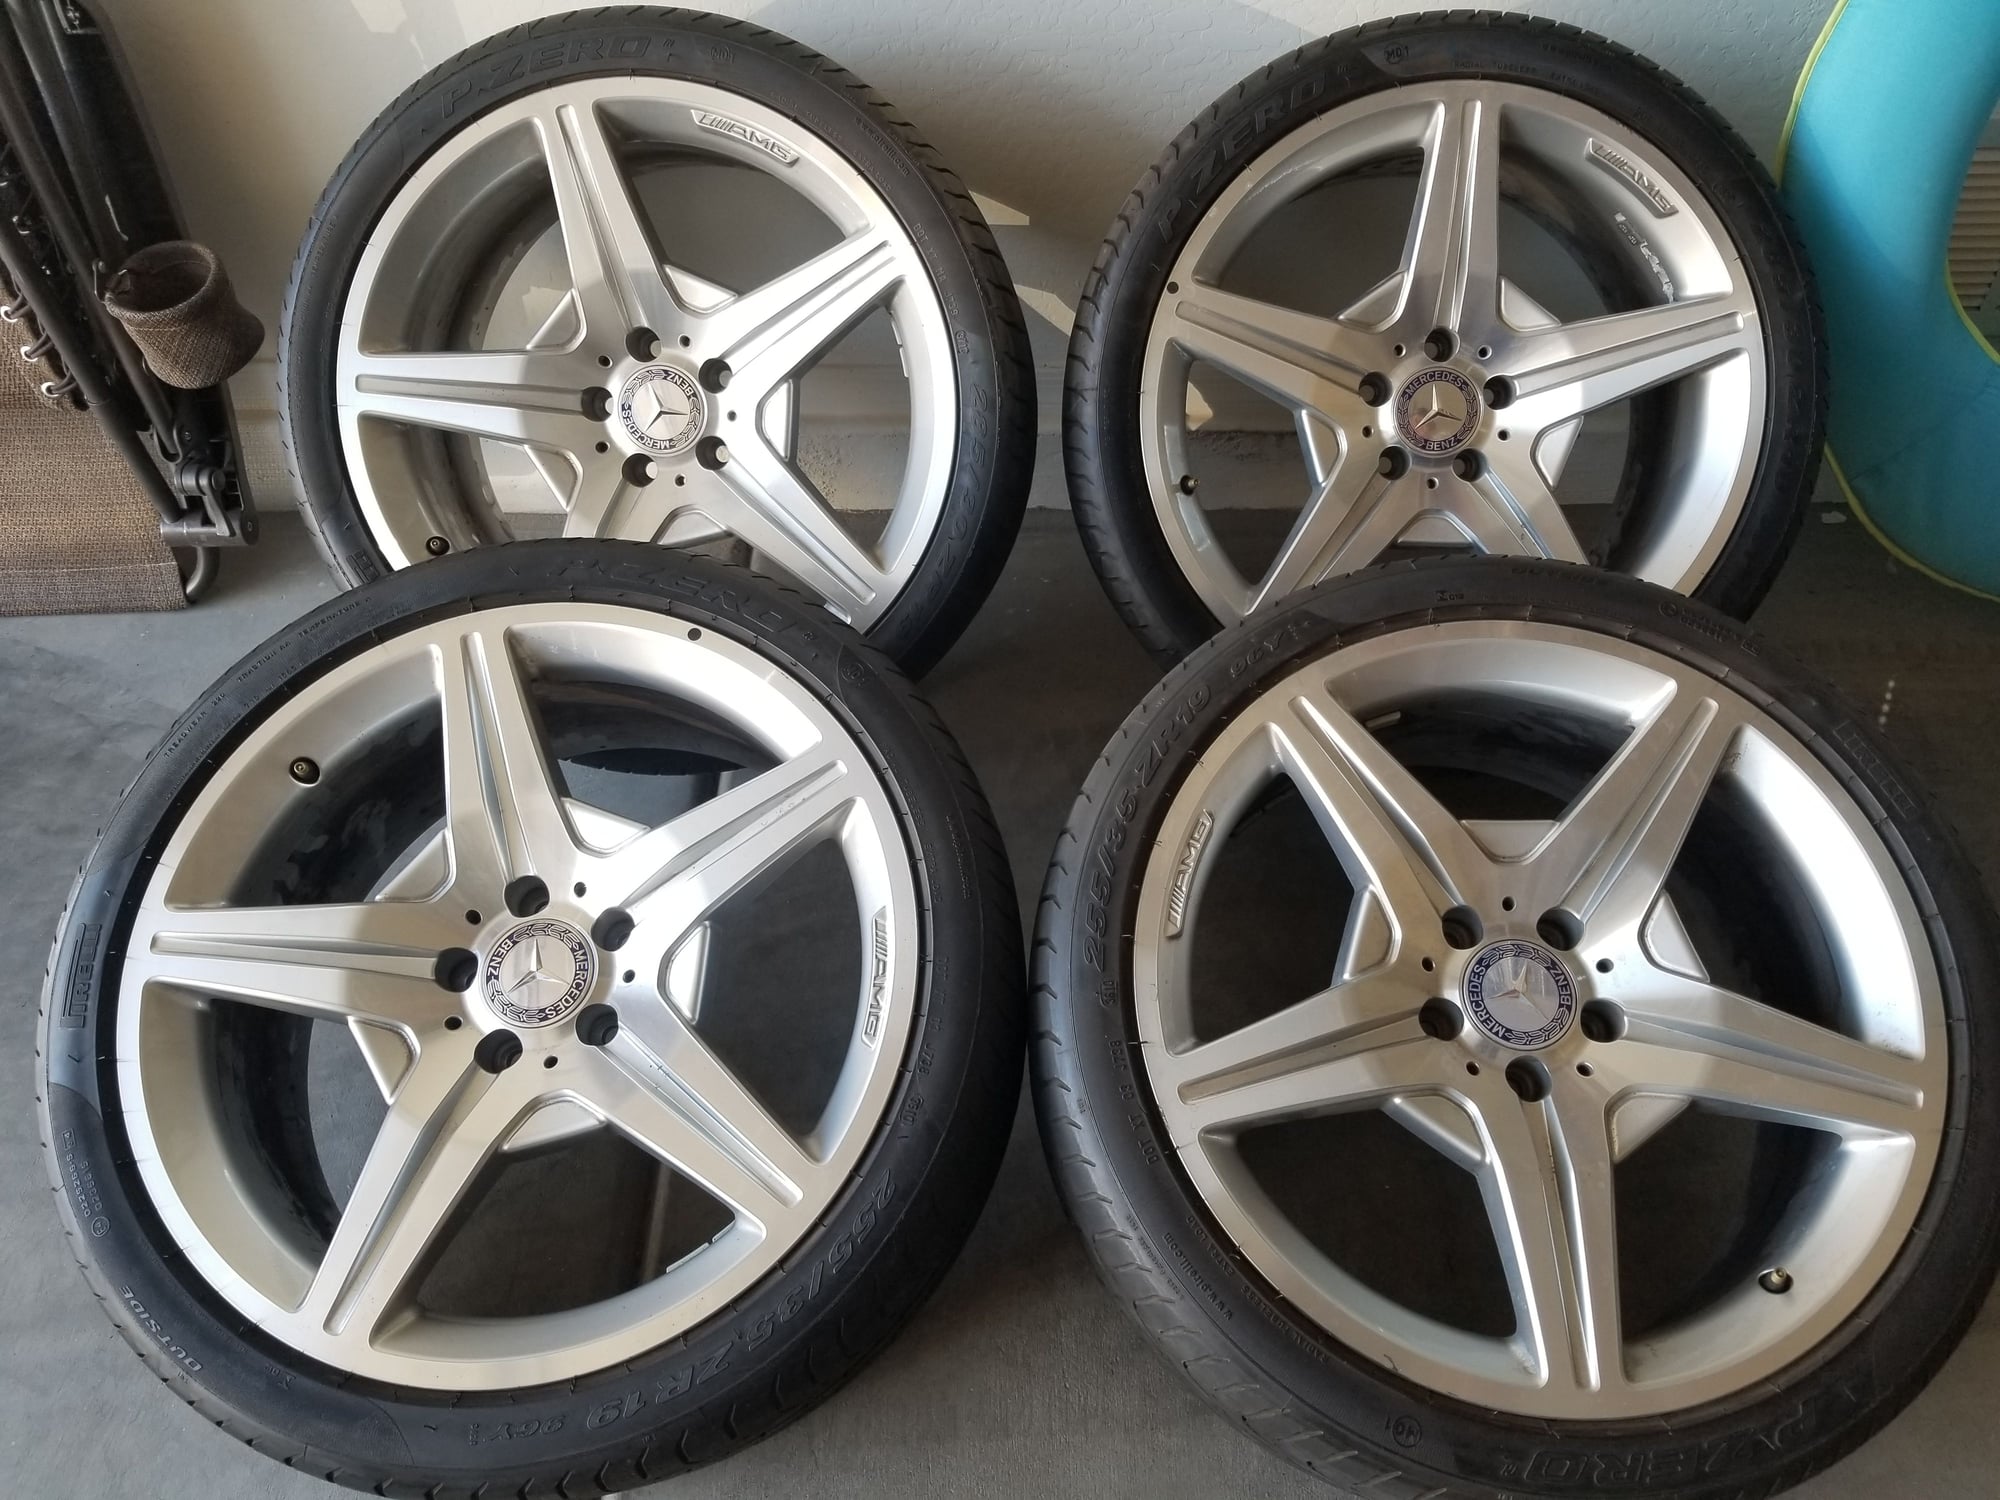 Wheels and Tires/Axles - 19 Inch AMG wheels and tires - Used - Goodyear, AZ 85338, United States